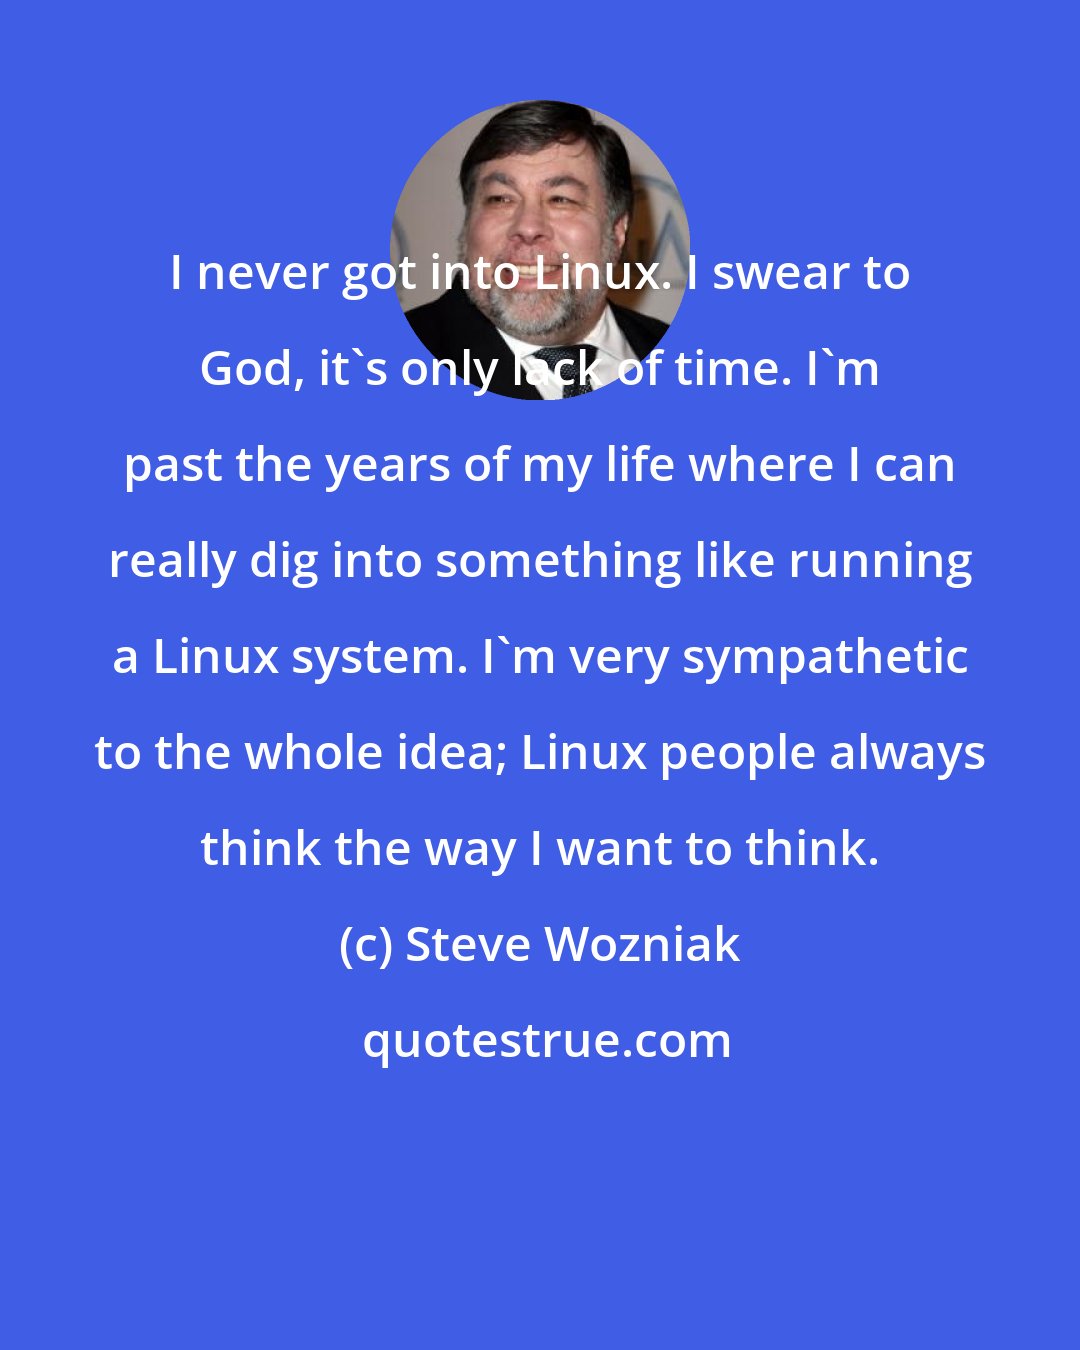 Steve Wozniak: I never got into Linux. I swear to God, it's only lack of time. I'm past the years of my life where I can really dig into something like running a Linux system. I'm very sympathetic to the whole idea; Linux people always think the way I want to think.